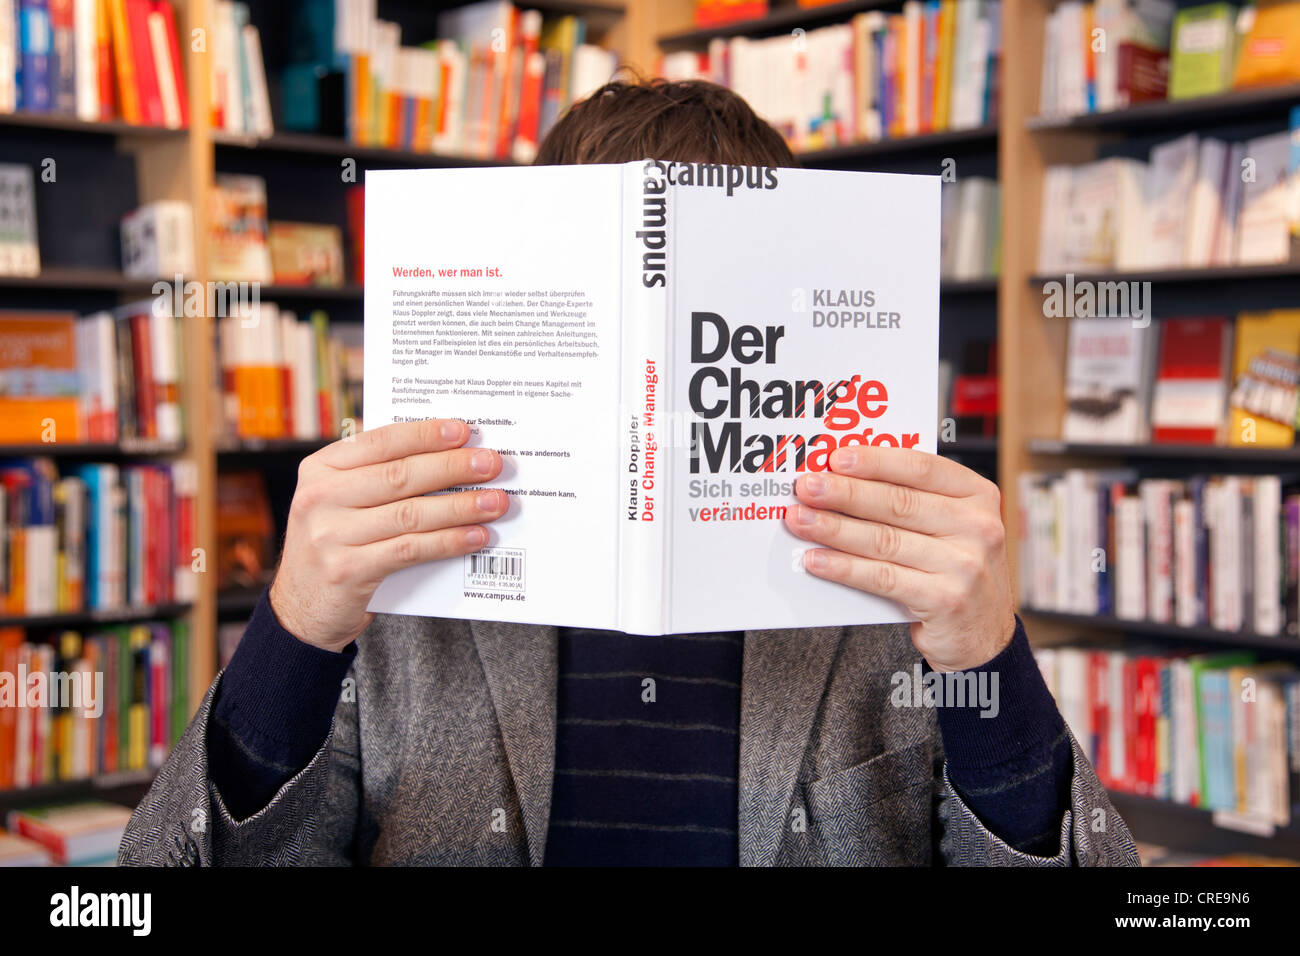 Man holding a book in front of his face, in a bookstore in Regensburg, Bavaria, Germany, Europe Stock Photo